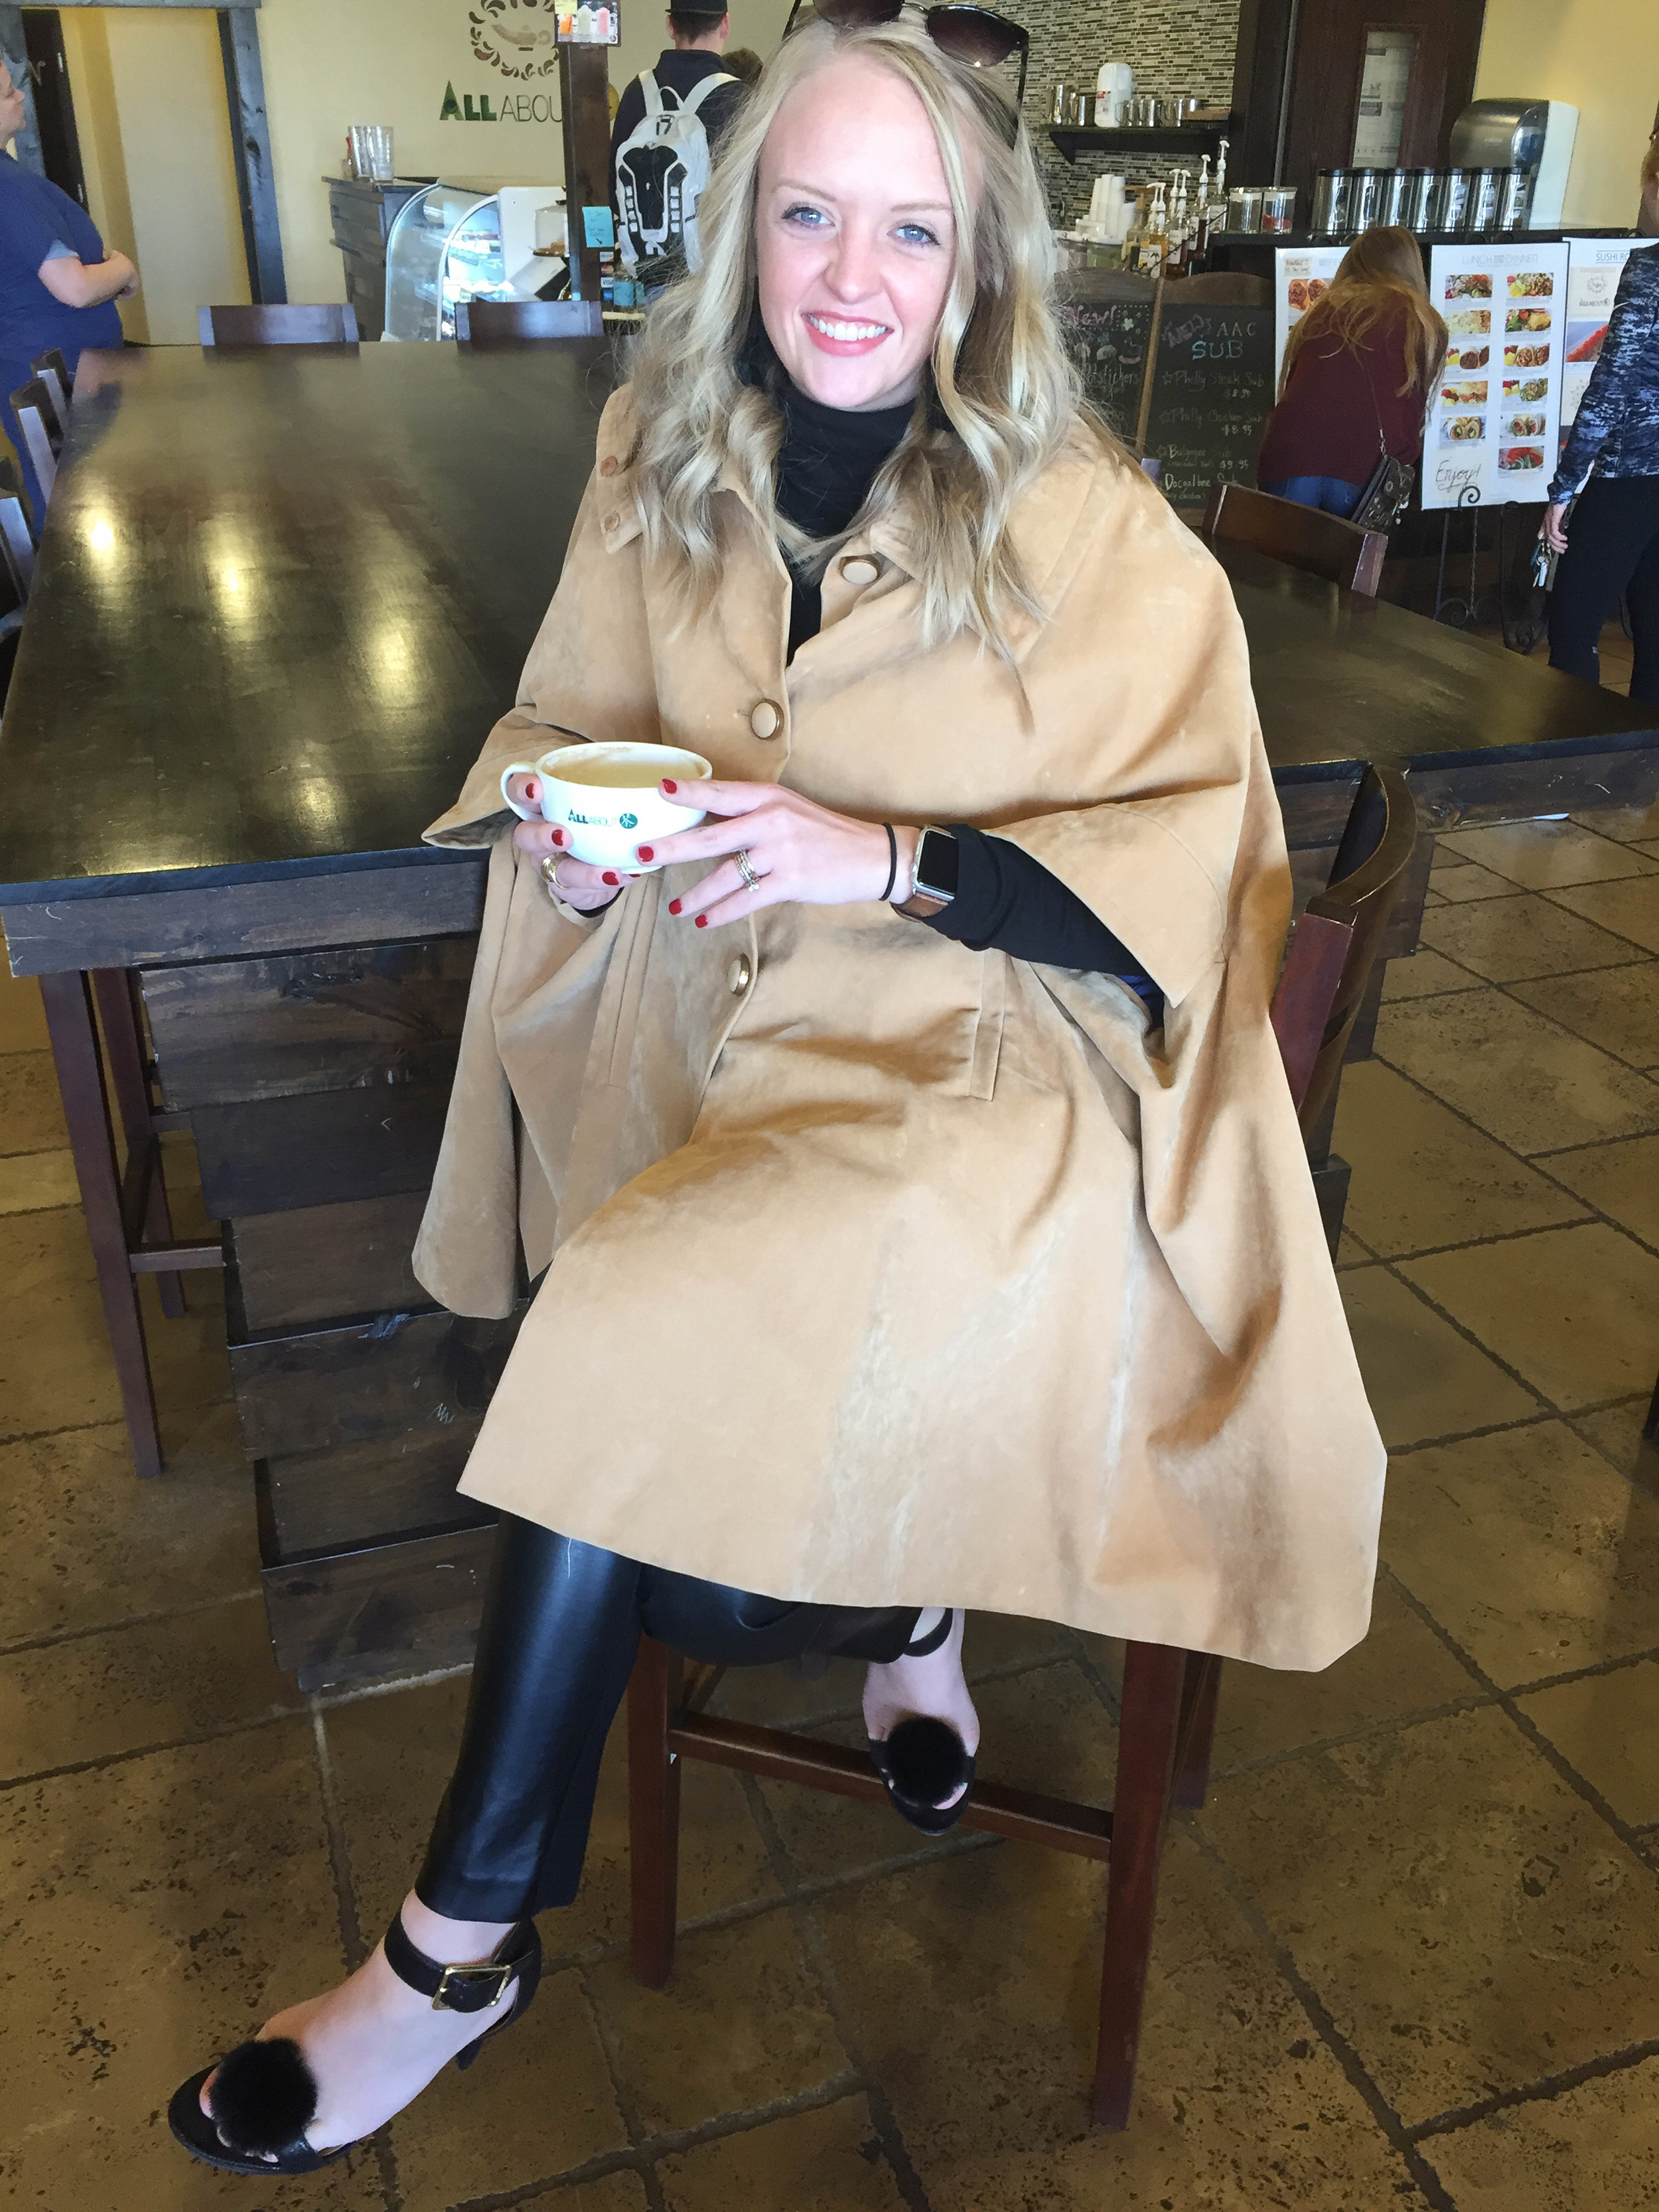 Vintage style: camel cape, Fashion and Cookies